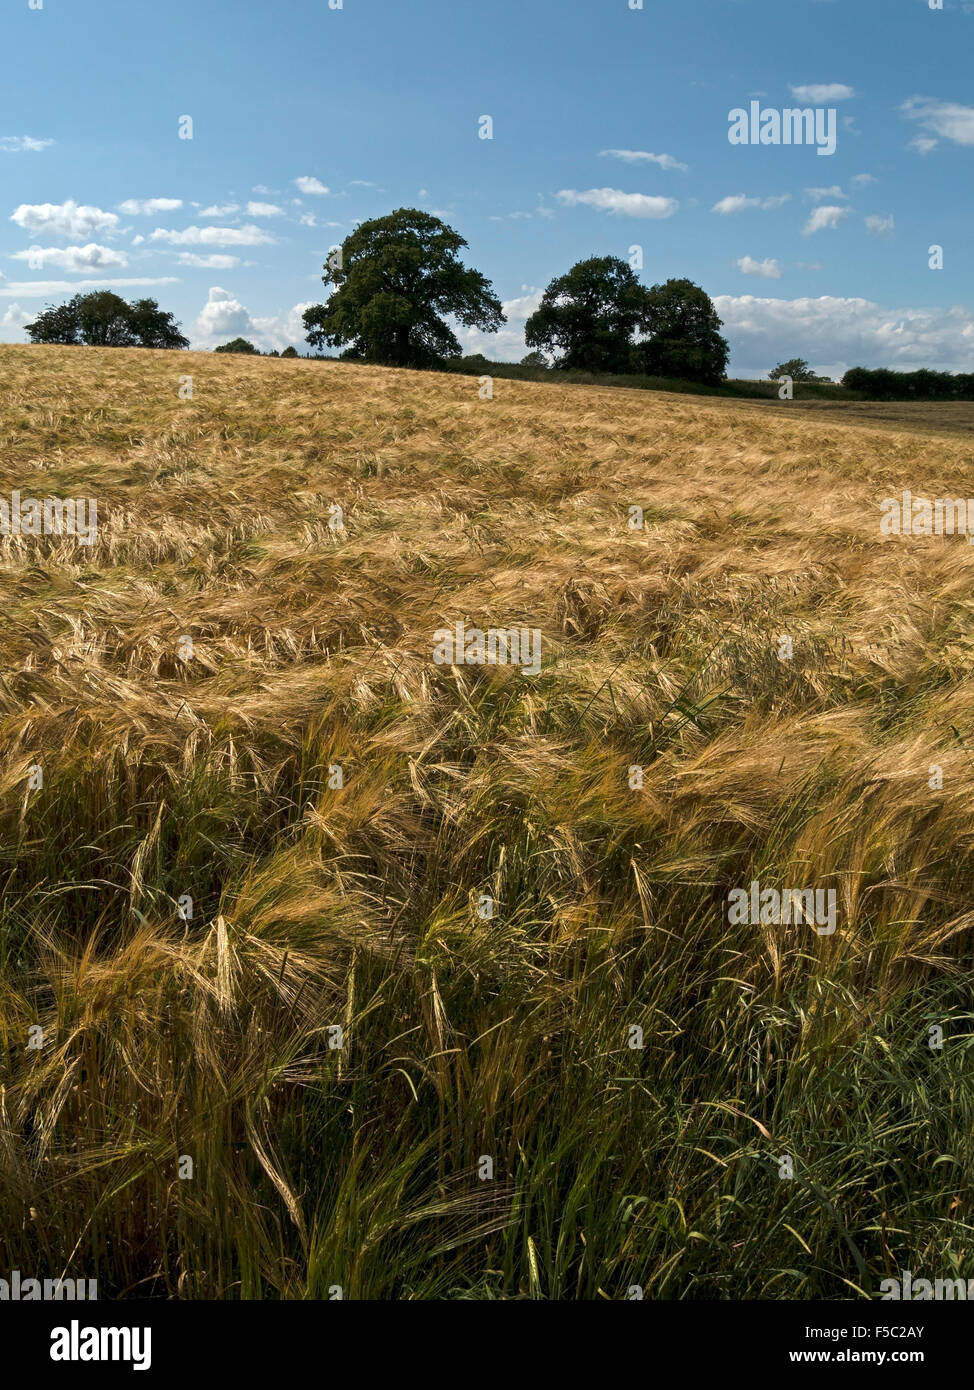 Sunlit golden yellow barley field with trees and blue sky above. Stock Photo